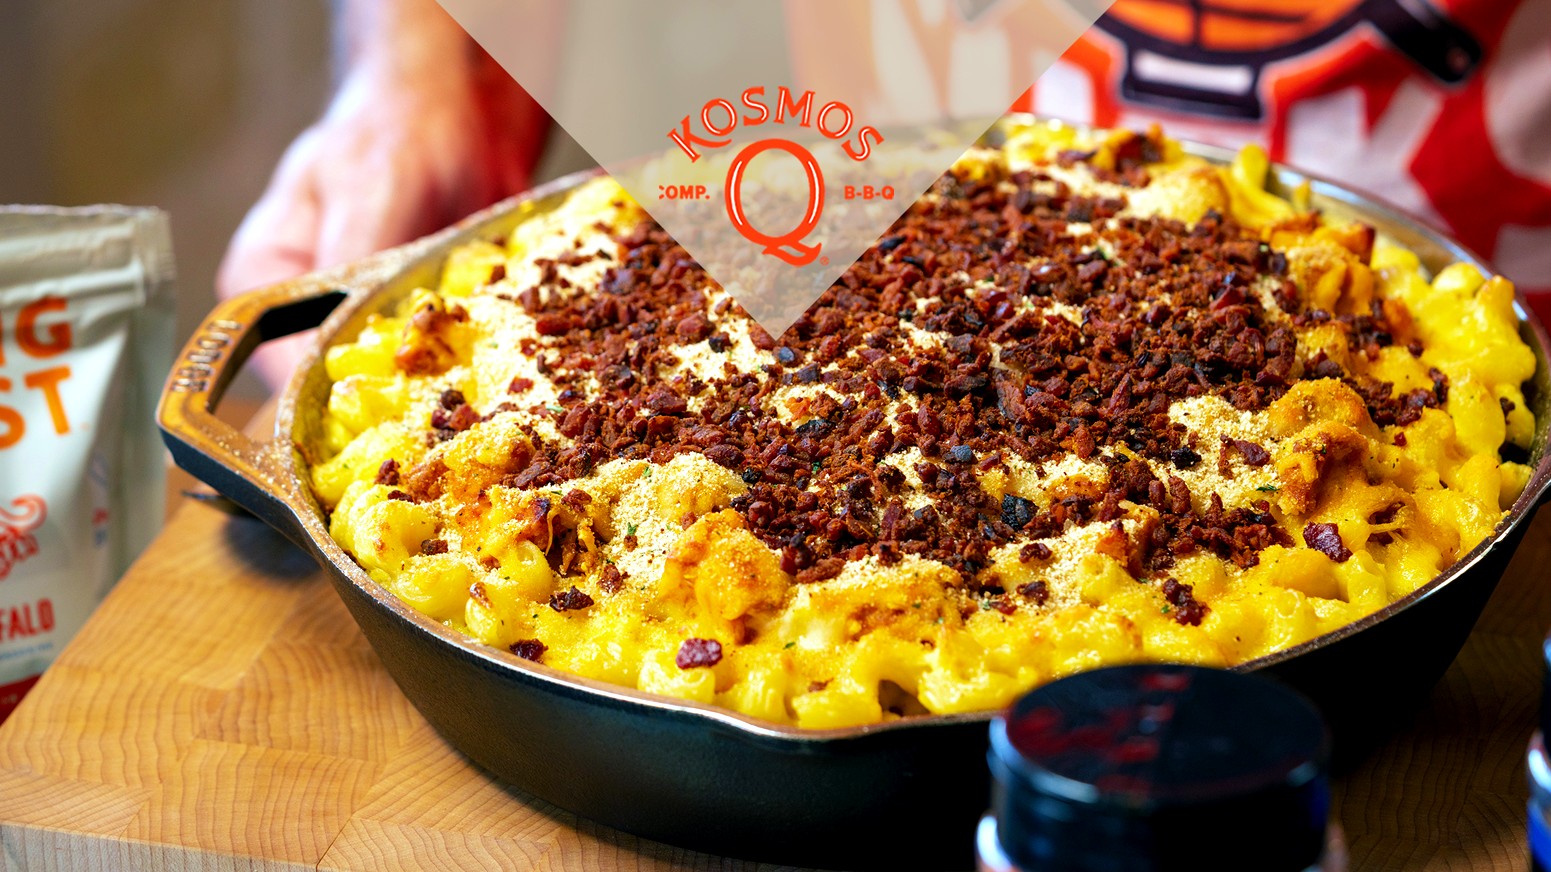 Image of Smoked Fried Chicken Mac and Cheese Recipe